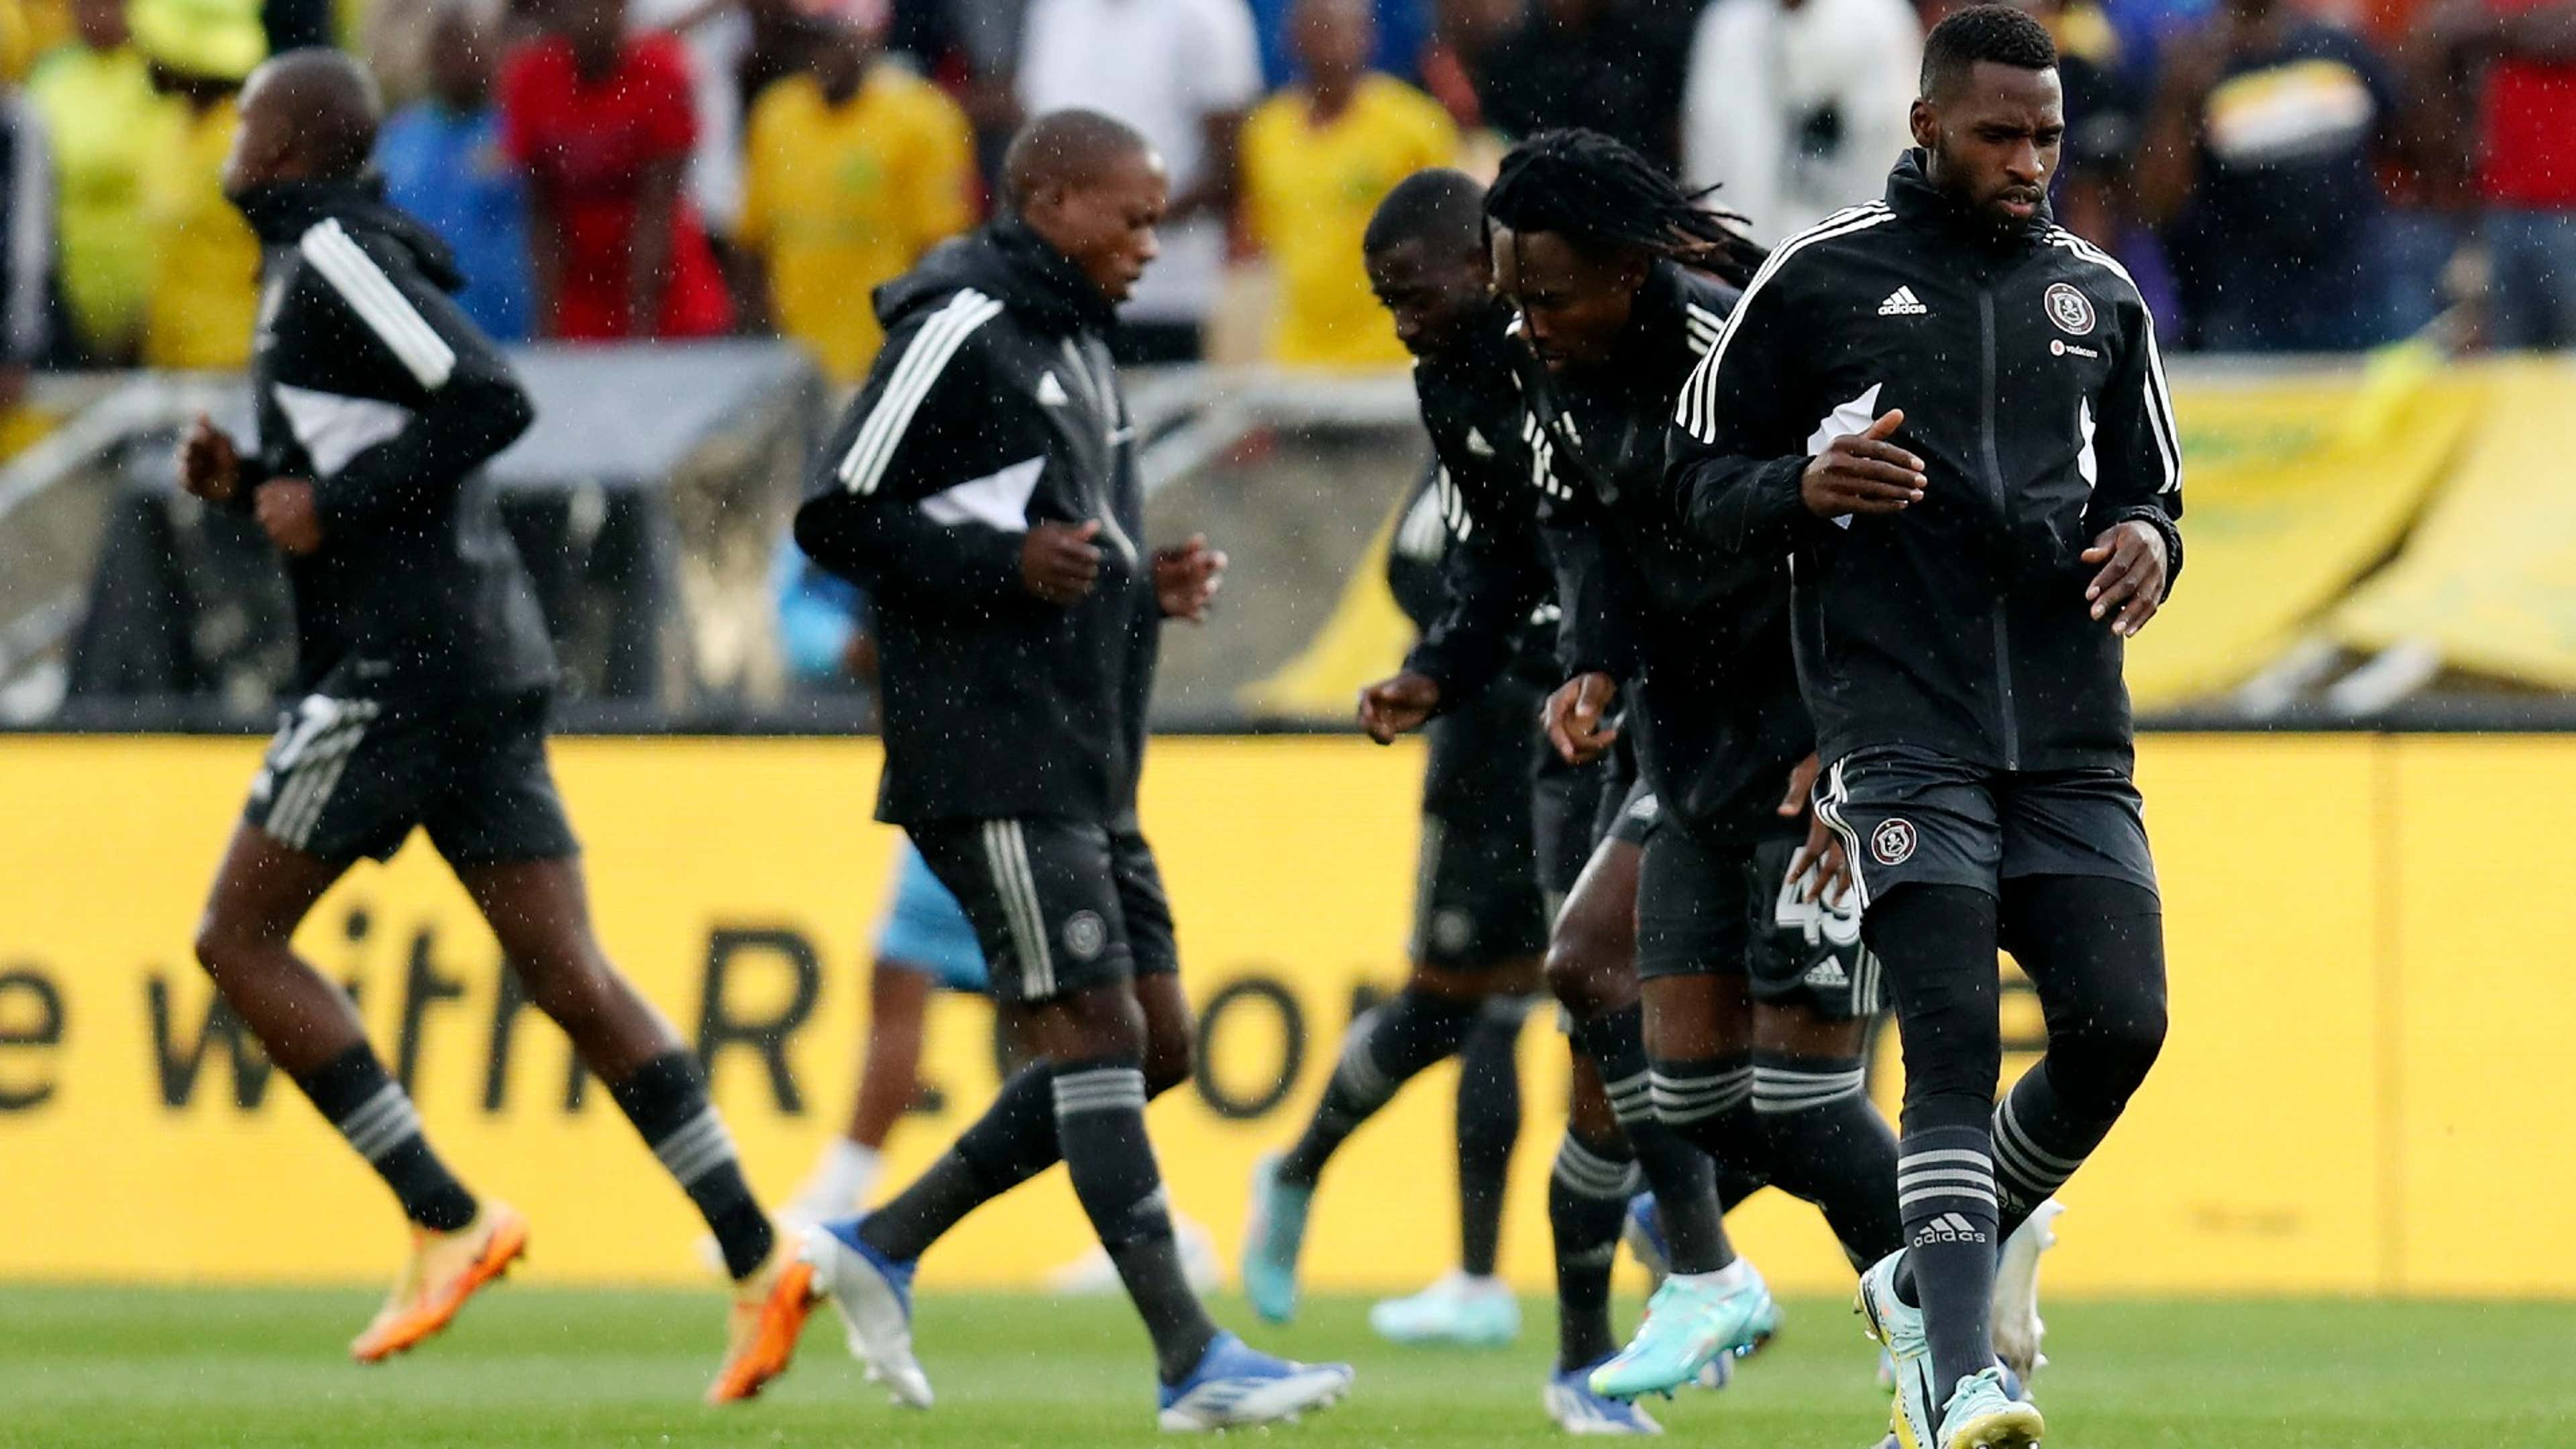 Vodacom Soccer on X: SBWL to give away the new @orlandopirates